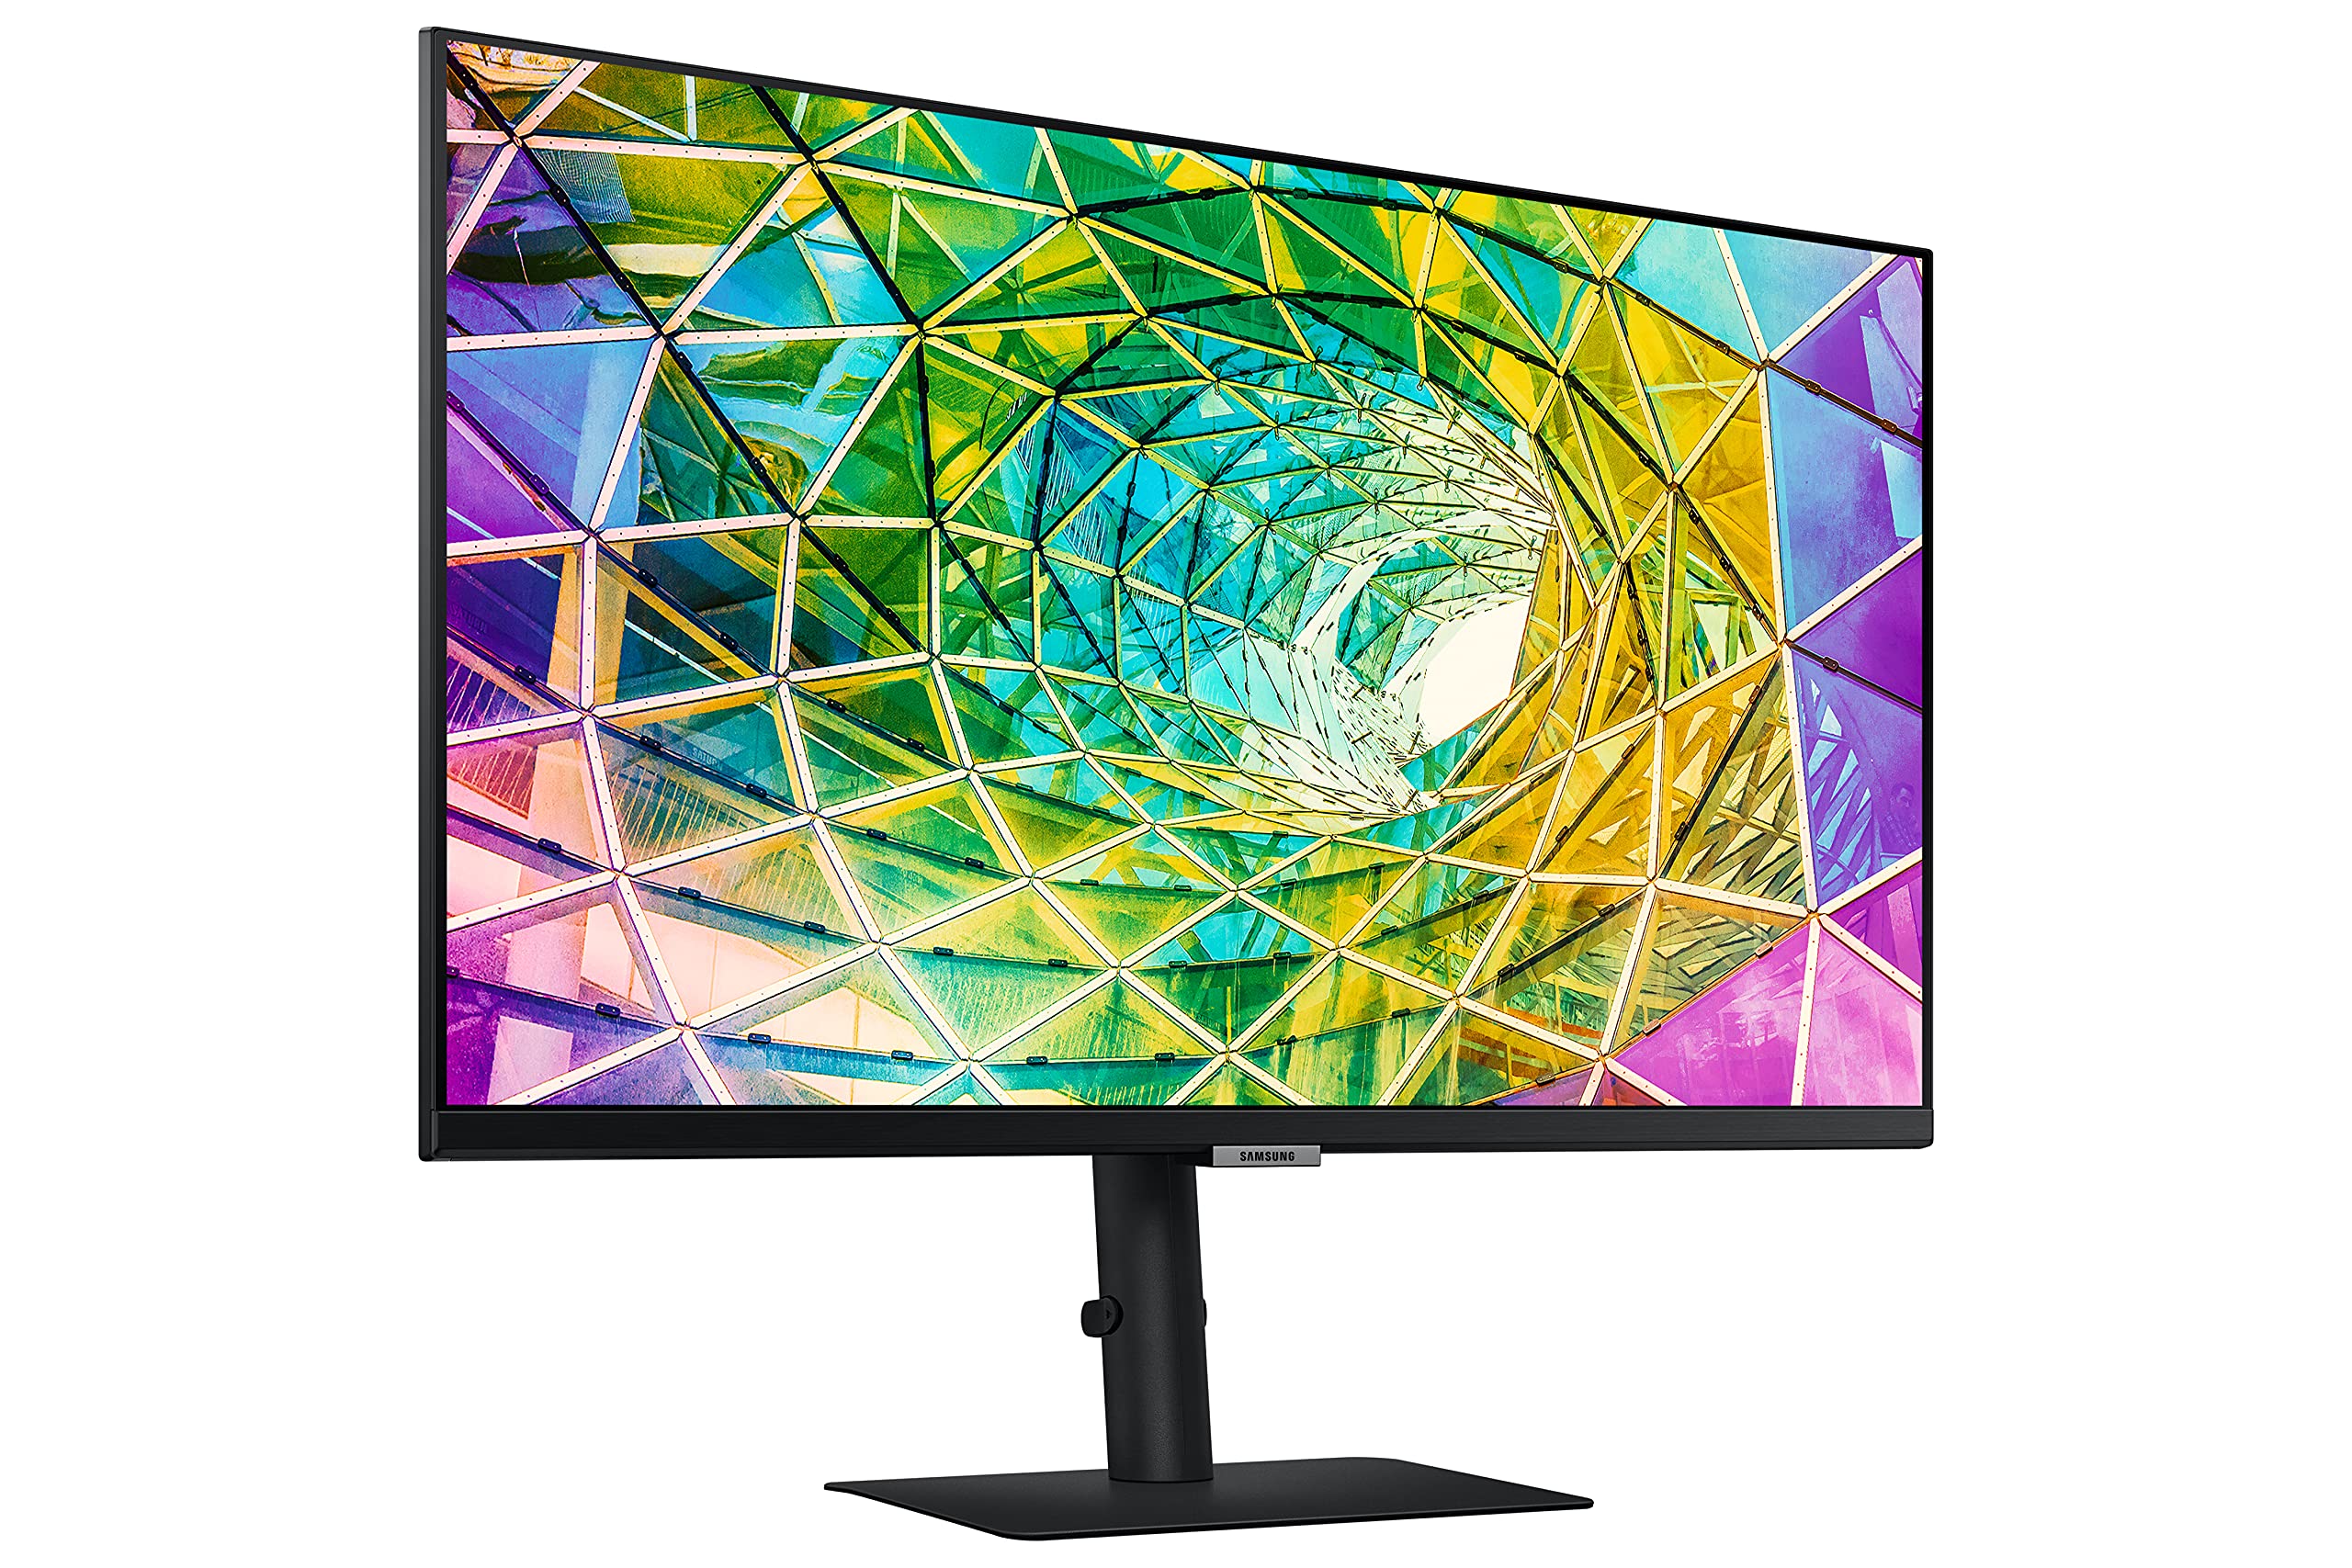 SAMSUNG ViewFinity S80A Series 27-Inch 4K UHD (3840x2160) Computer Monitor, HDMI, USB Hub, HDR10 (1 Billion Colors), Height Adjustable Stand, TUV-Certified Intelligent Eye Care (LS27A804NMNXGO),Black